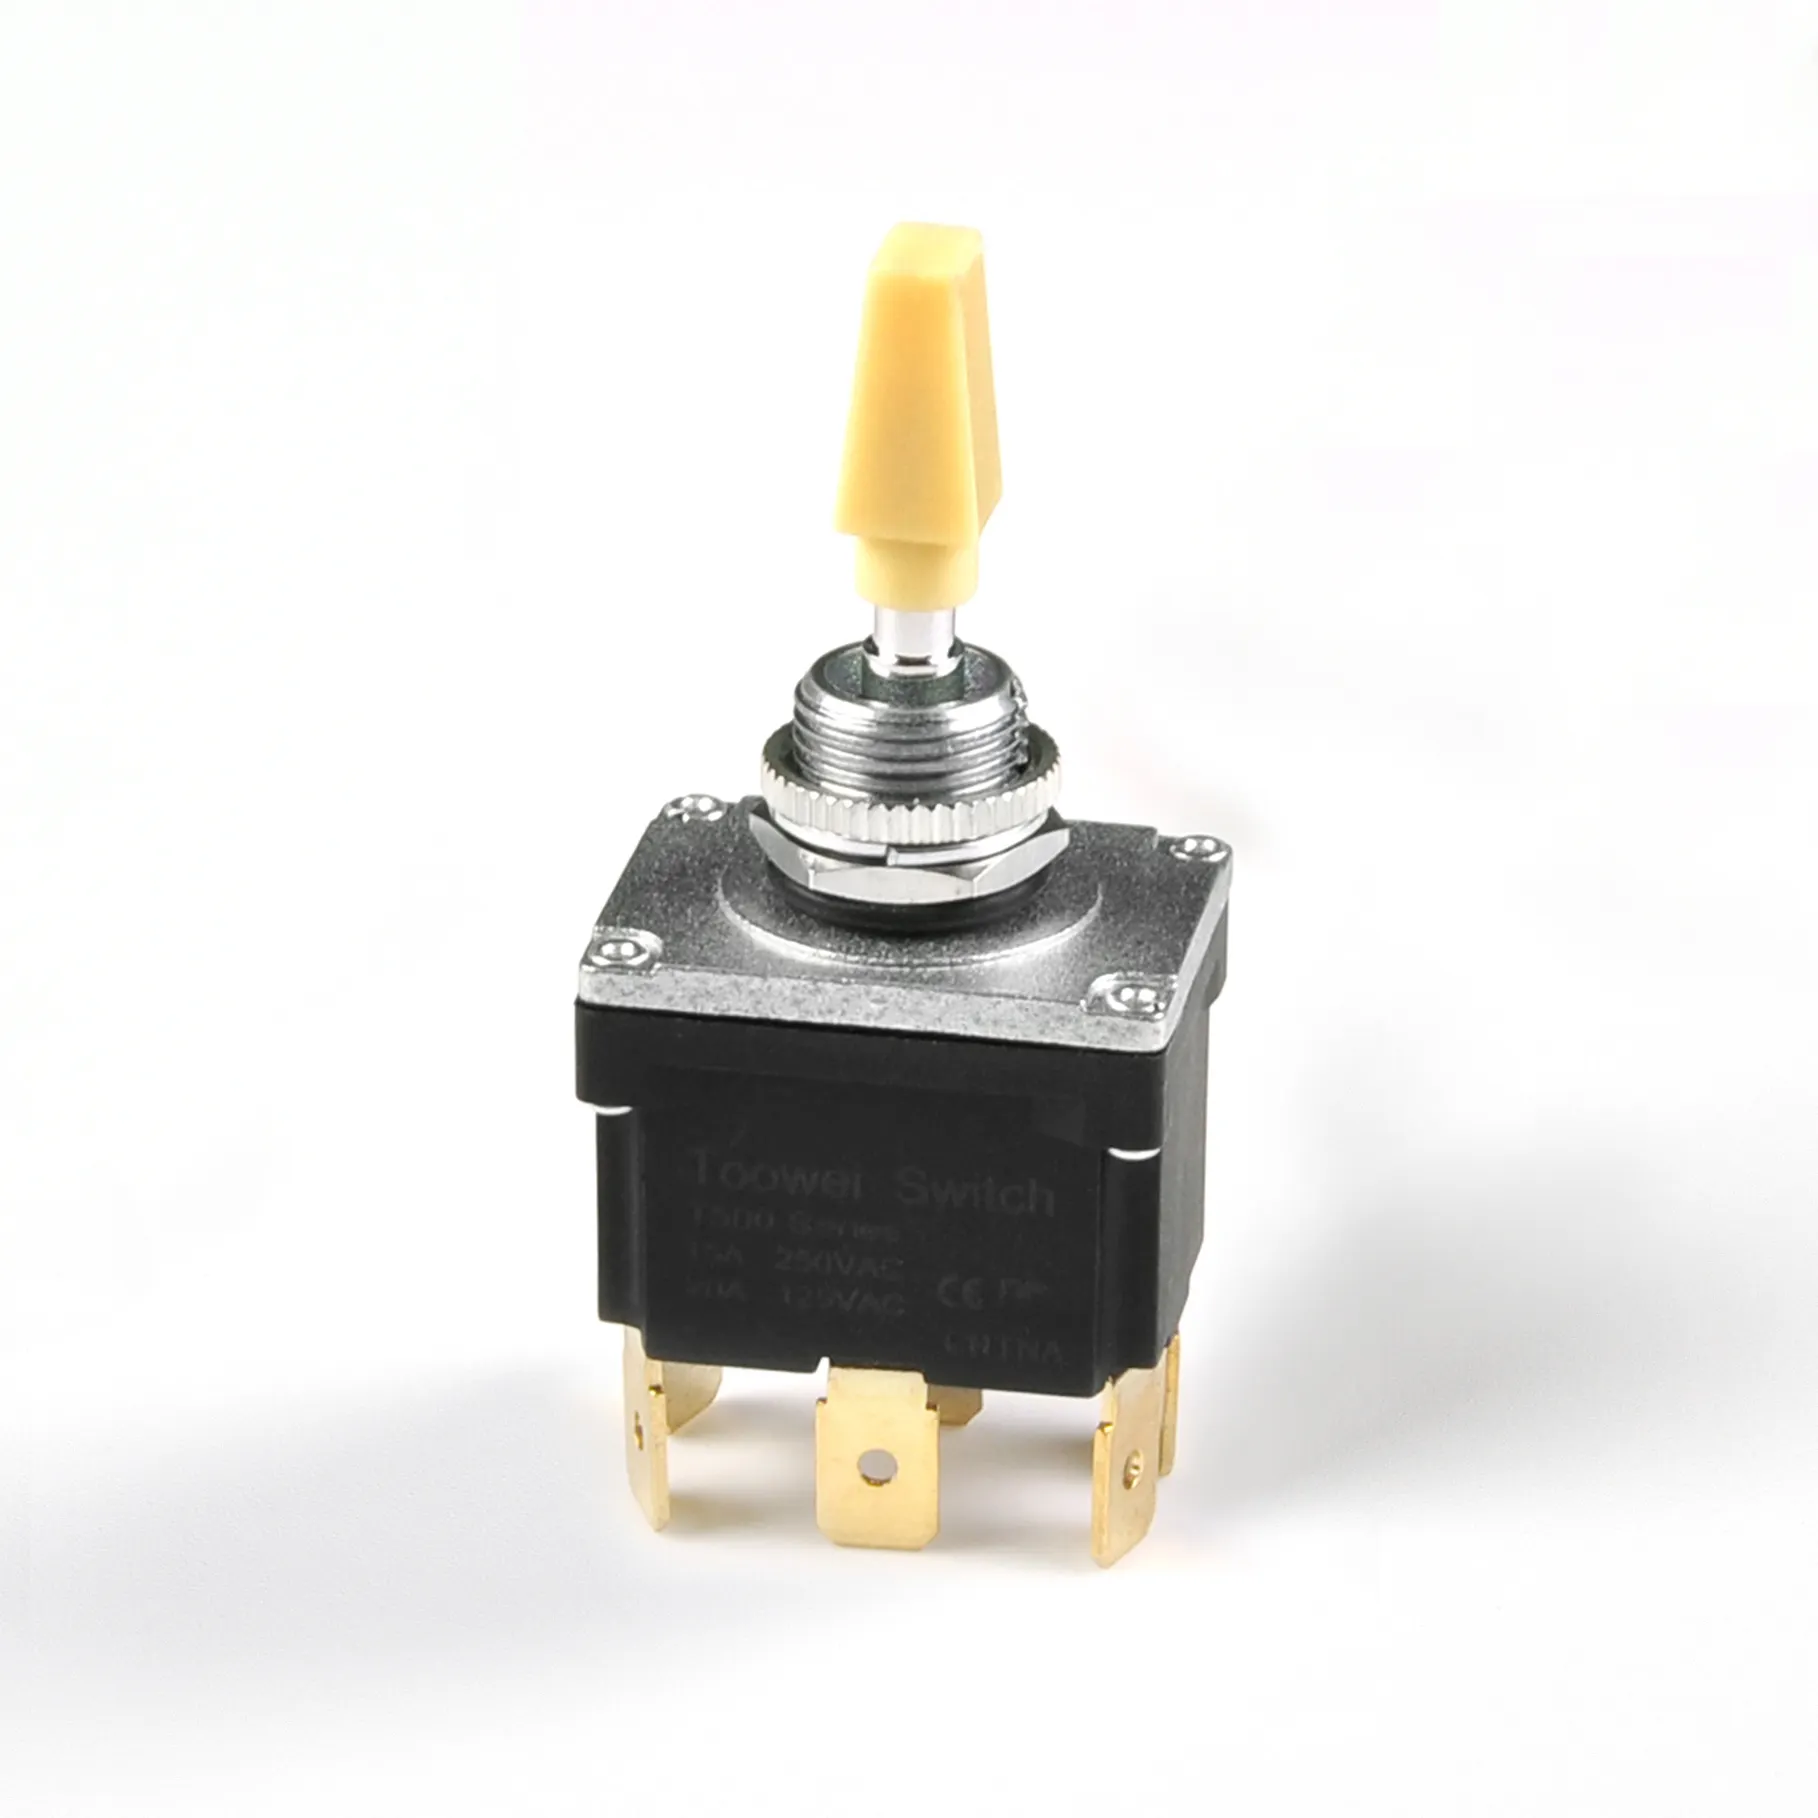 New product launch, double reset toggle Switch 6Pins (ON)-OFF-(ON) IP67 Waterproof DPDT 3 Way T502MTY with Yellow handle